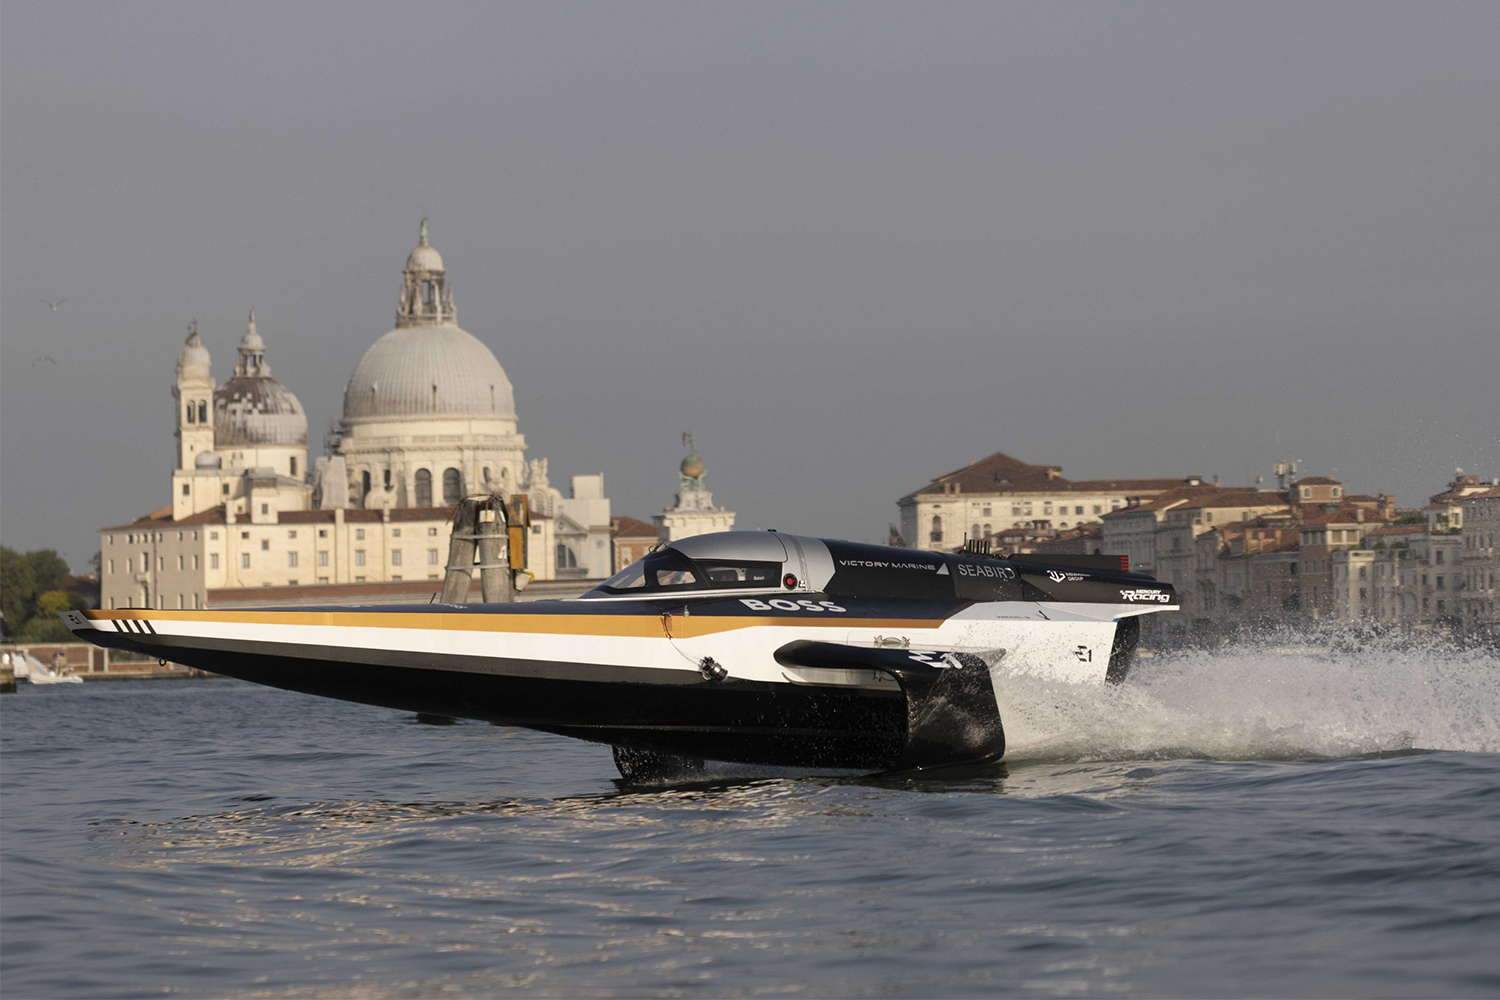 The RaceBird electric boat, which will race in the E1 series, is testing in the waters of Venice in June 2022